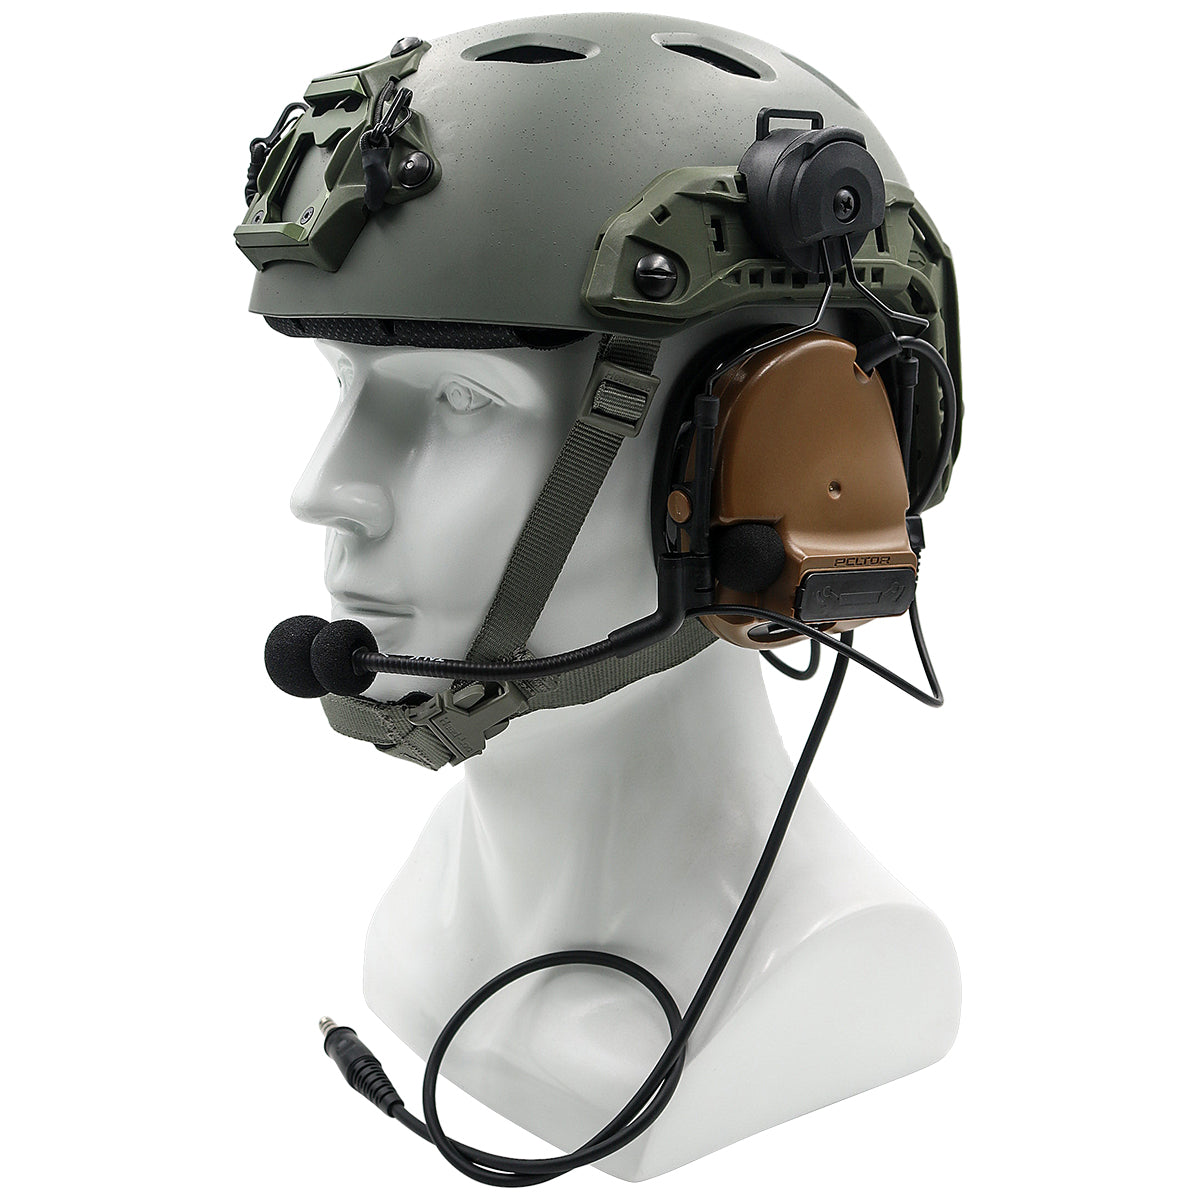 TAC-SKY C3 Tactical Headset Helmet Fast Rail Version with kenwoodPTT Silicone Earmuffs Noise Reduction